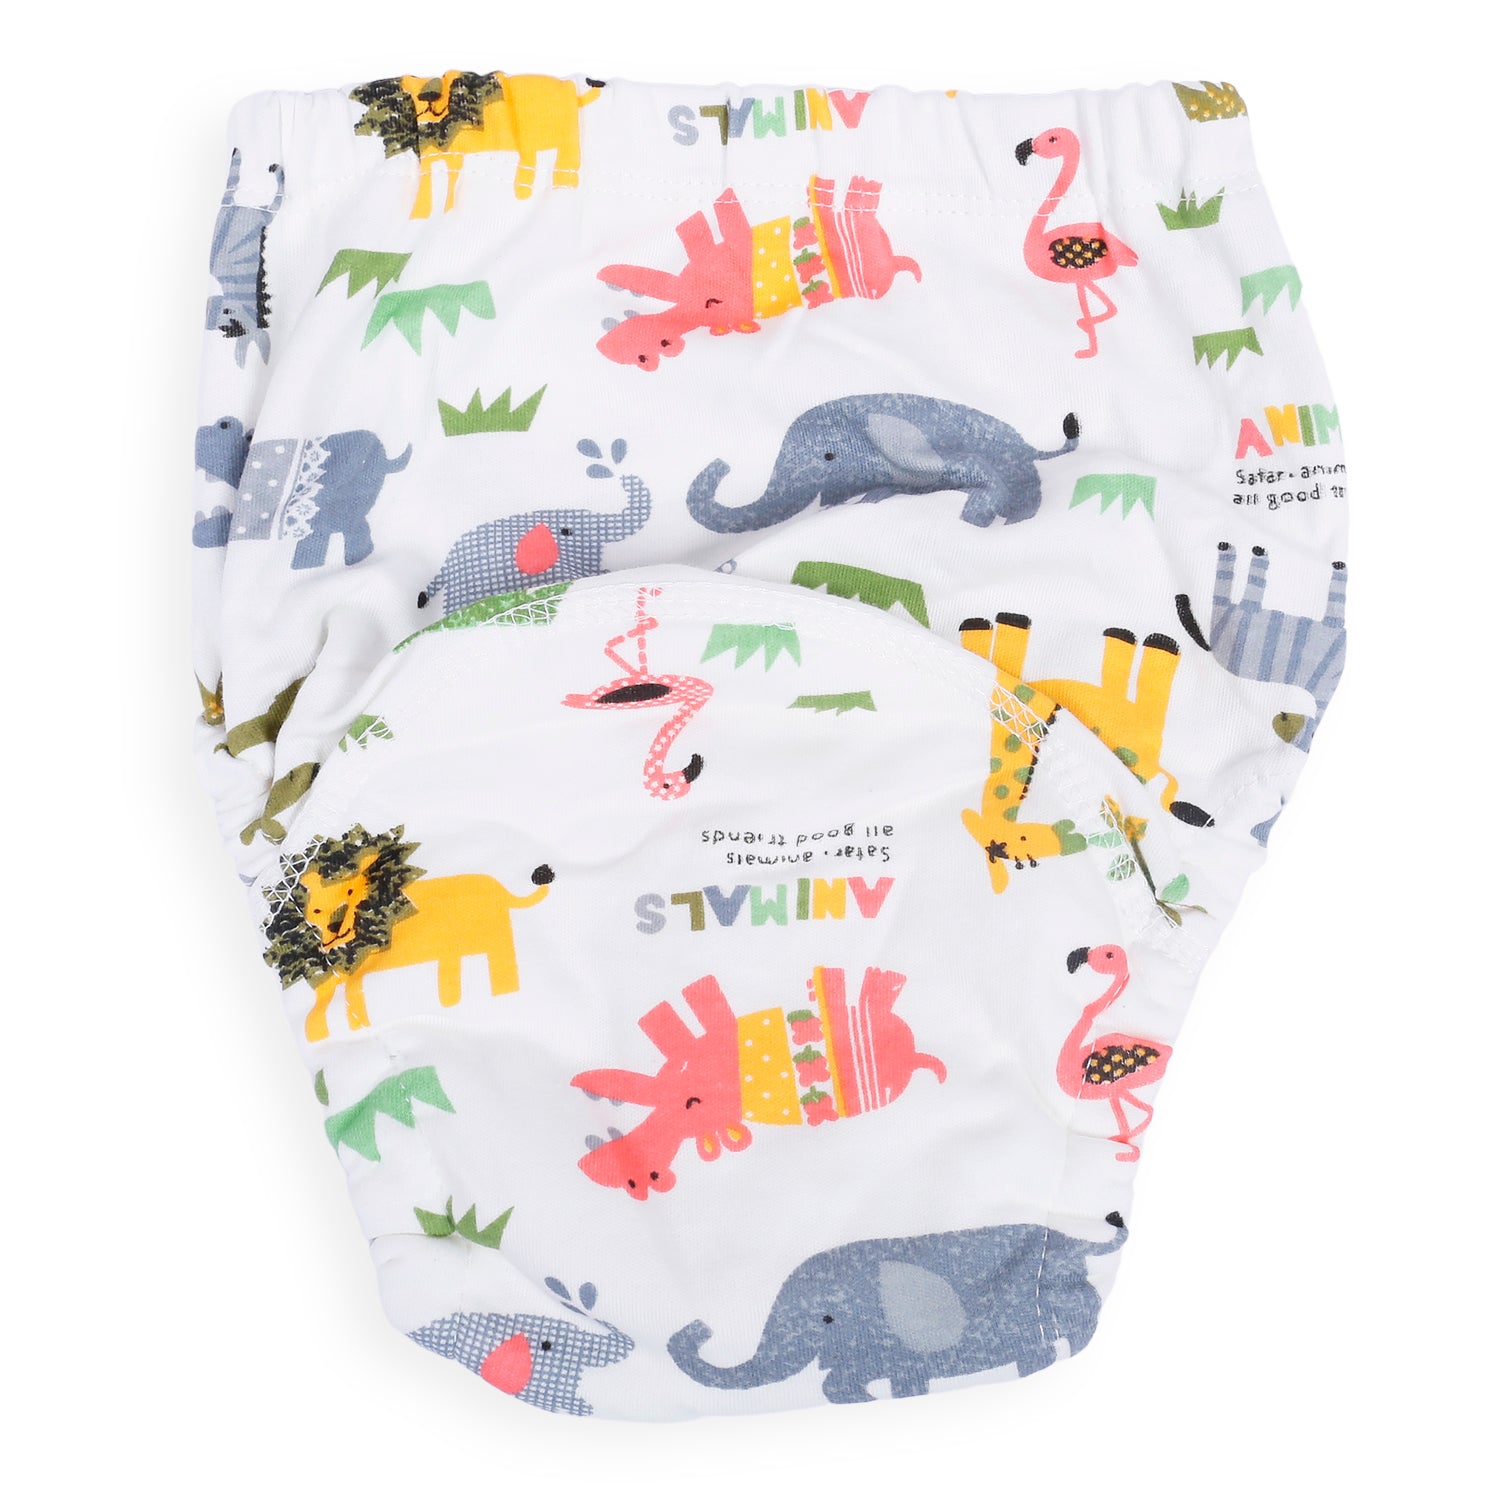 I Love Animals Reusable Cloth Training Pants Clothing Accessory Diaper Panty - Multicolour - Baby Moo